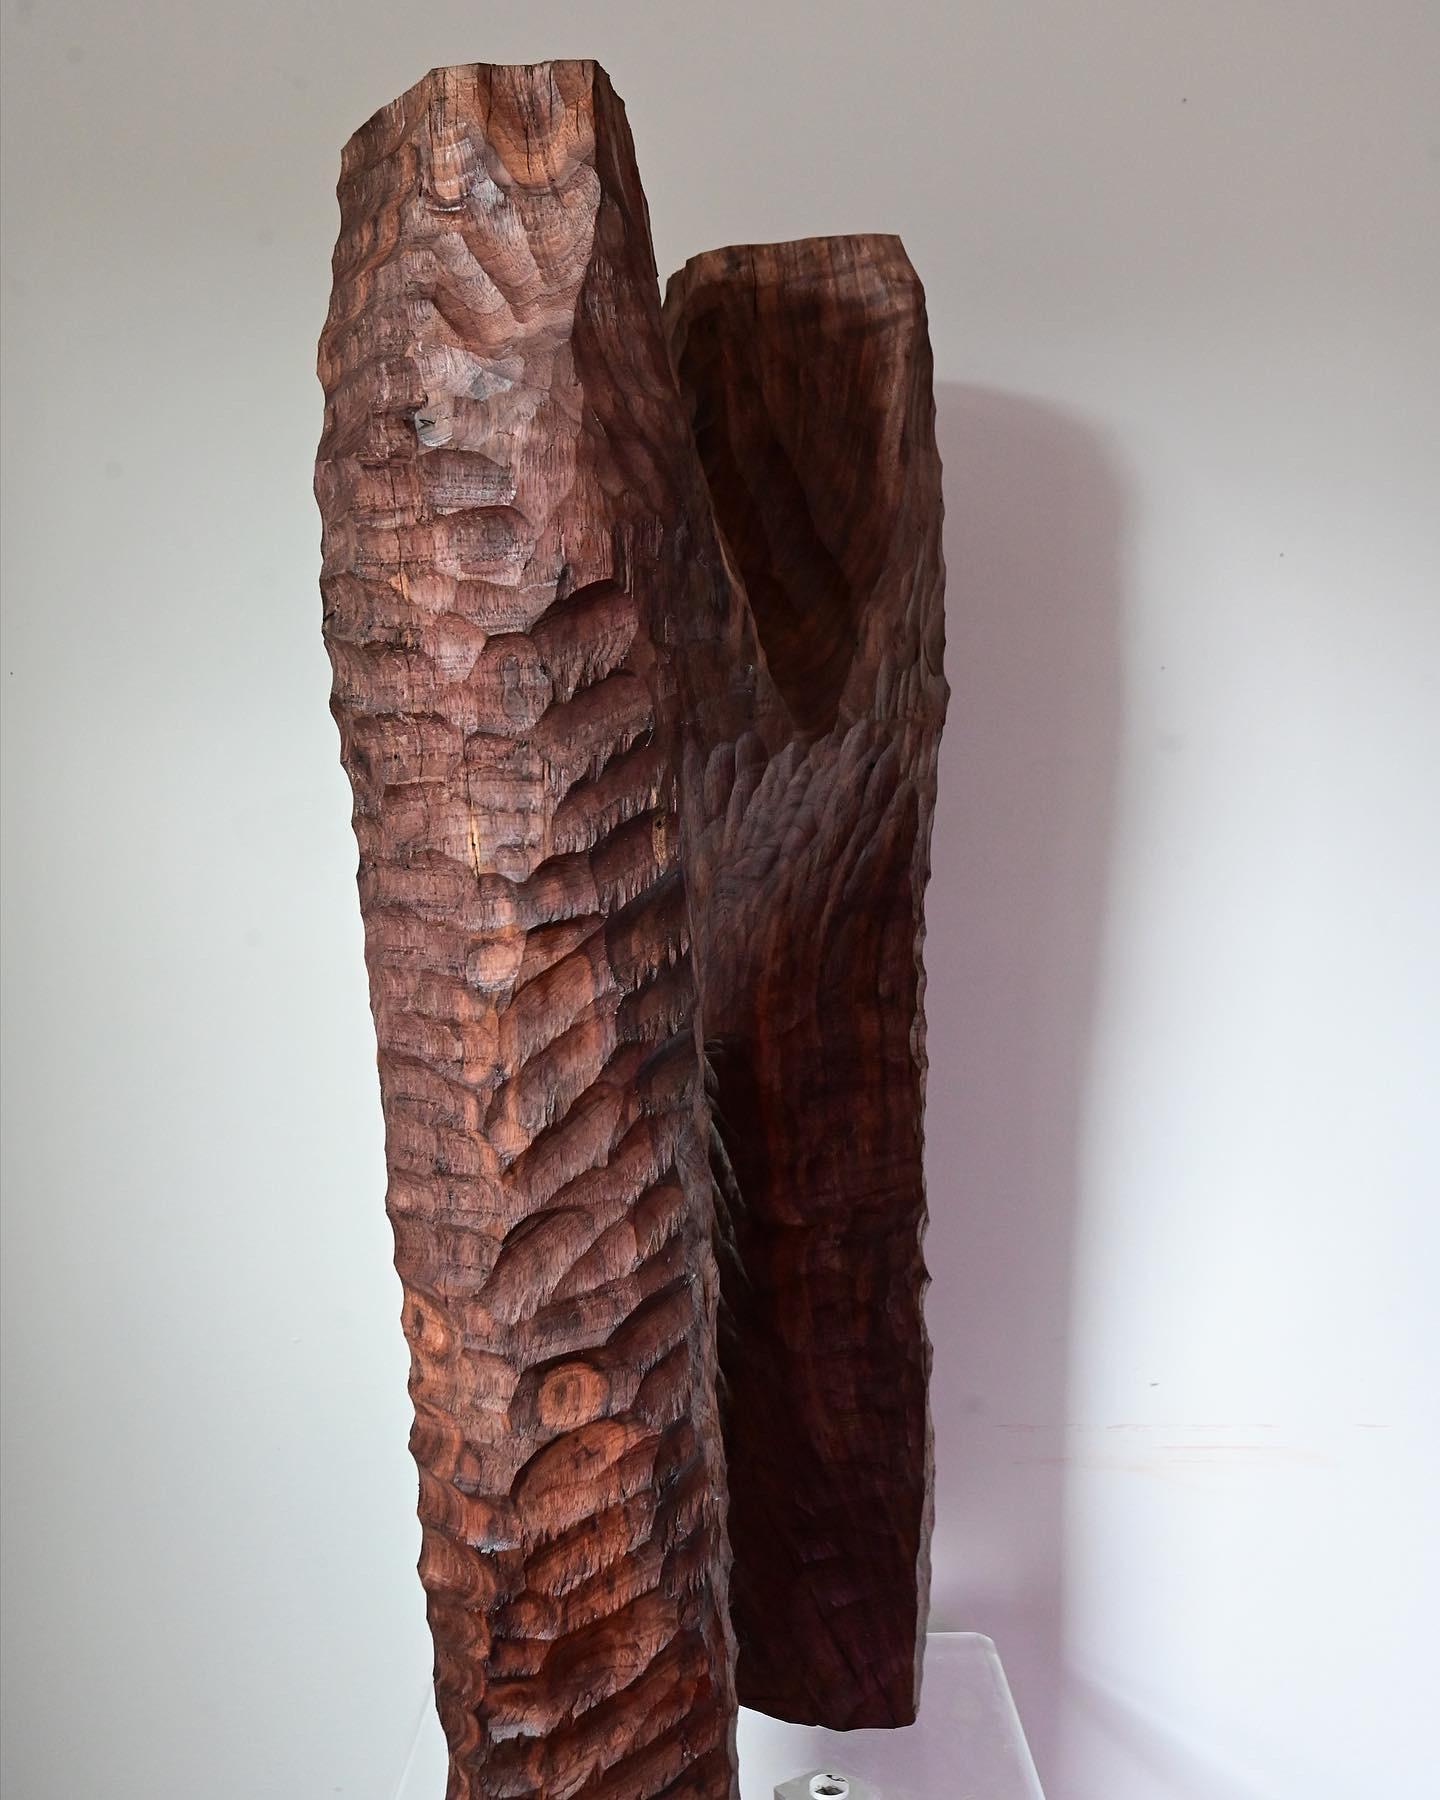 Original hand carved sculpture from a solid piece of walnut. Piece is done in a brutalist style with exposed hand tool markings. Has semi smooth texture with a durable hard wax finish. Measures 28